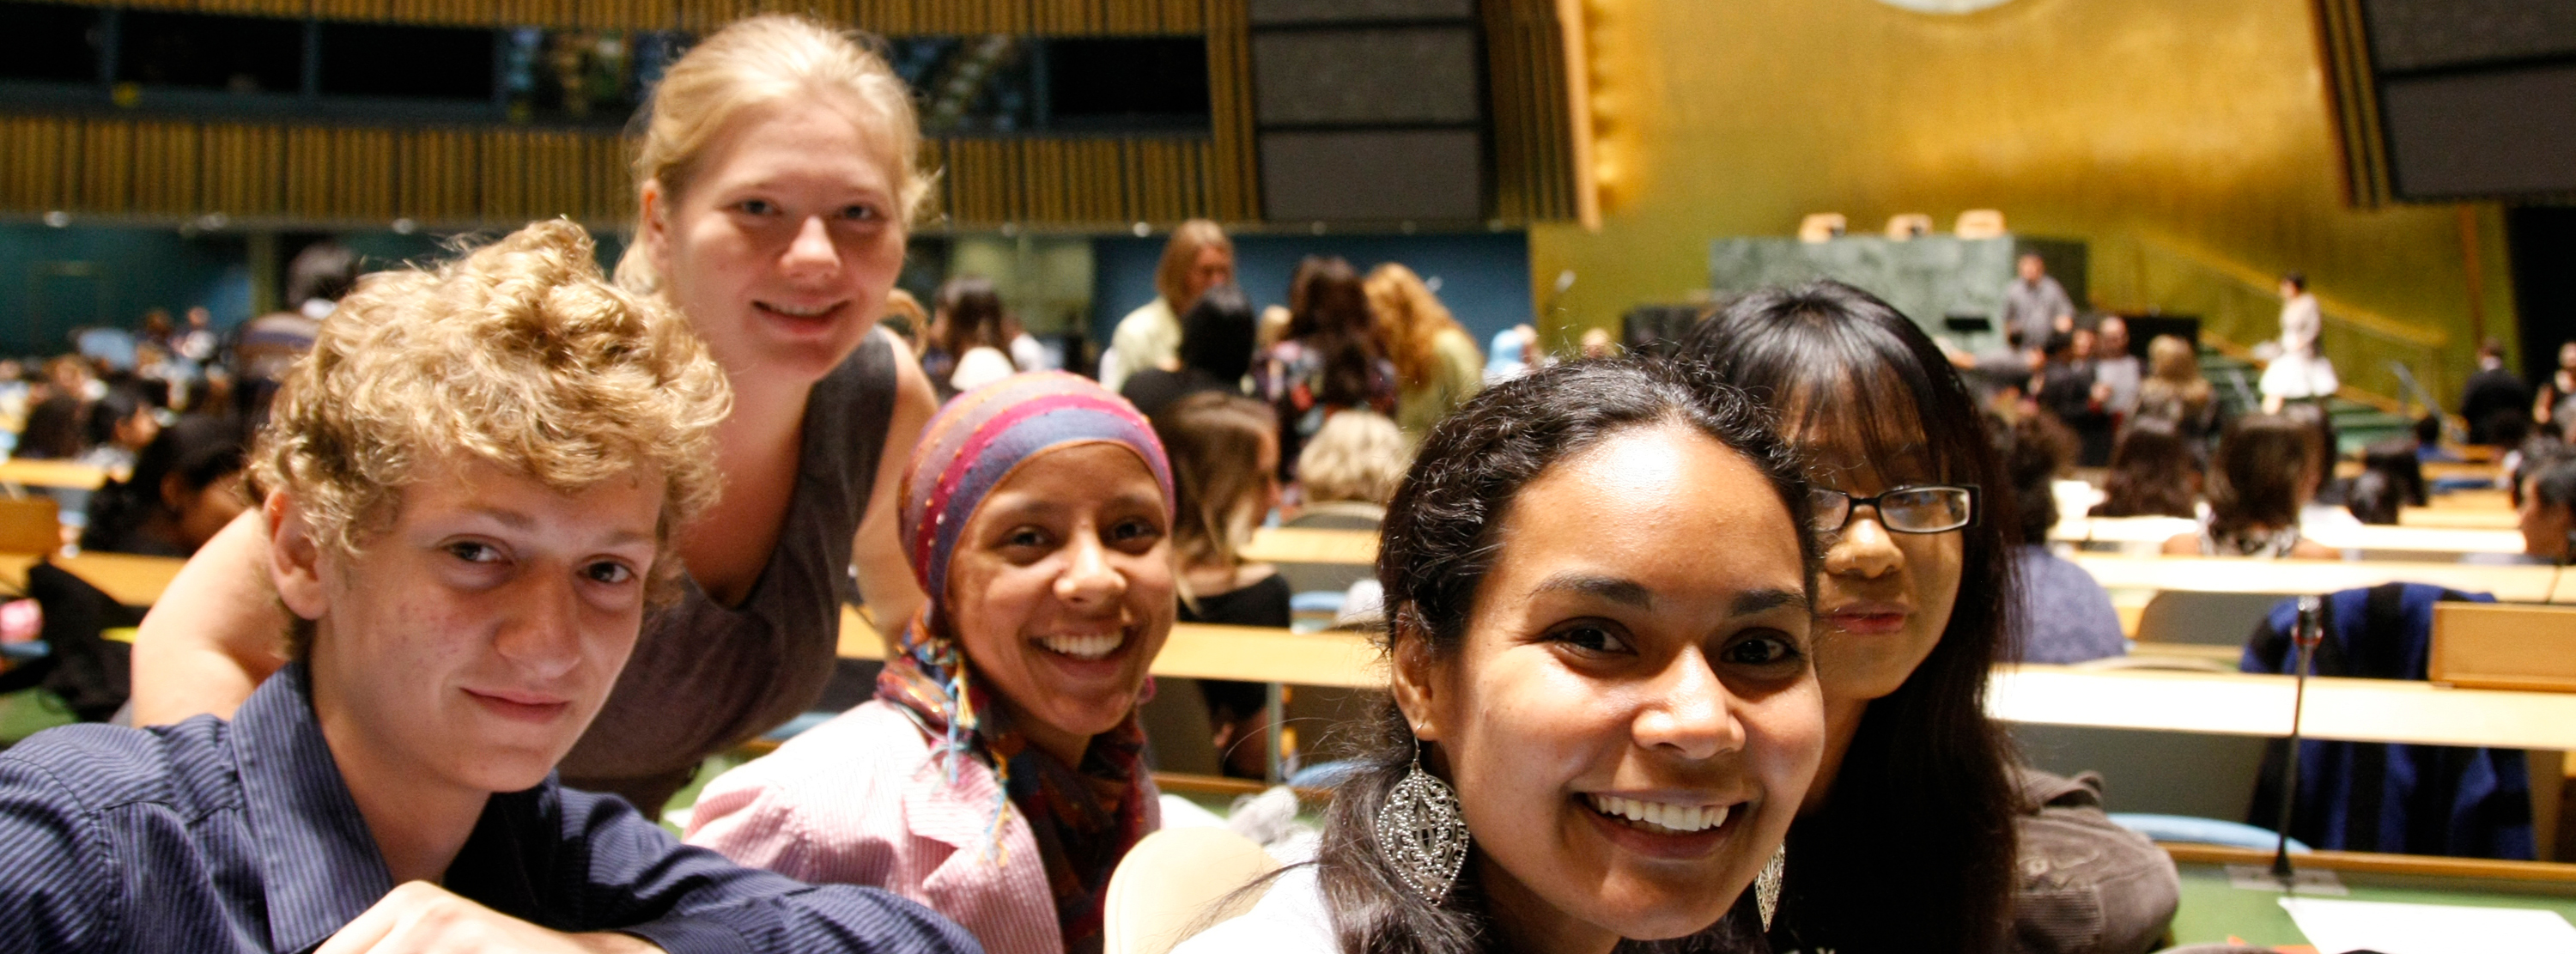 A group of young people smile from inside the General Assembly Hall.